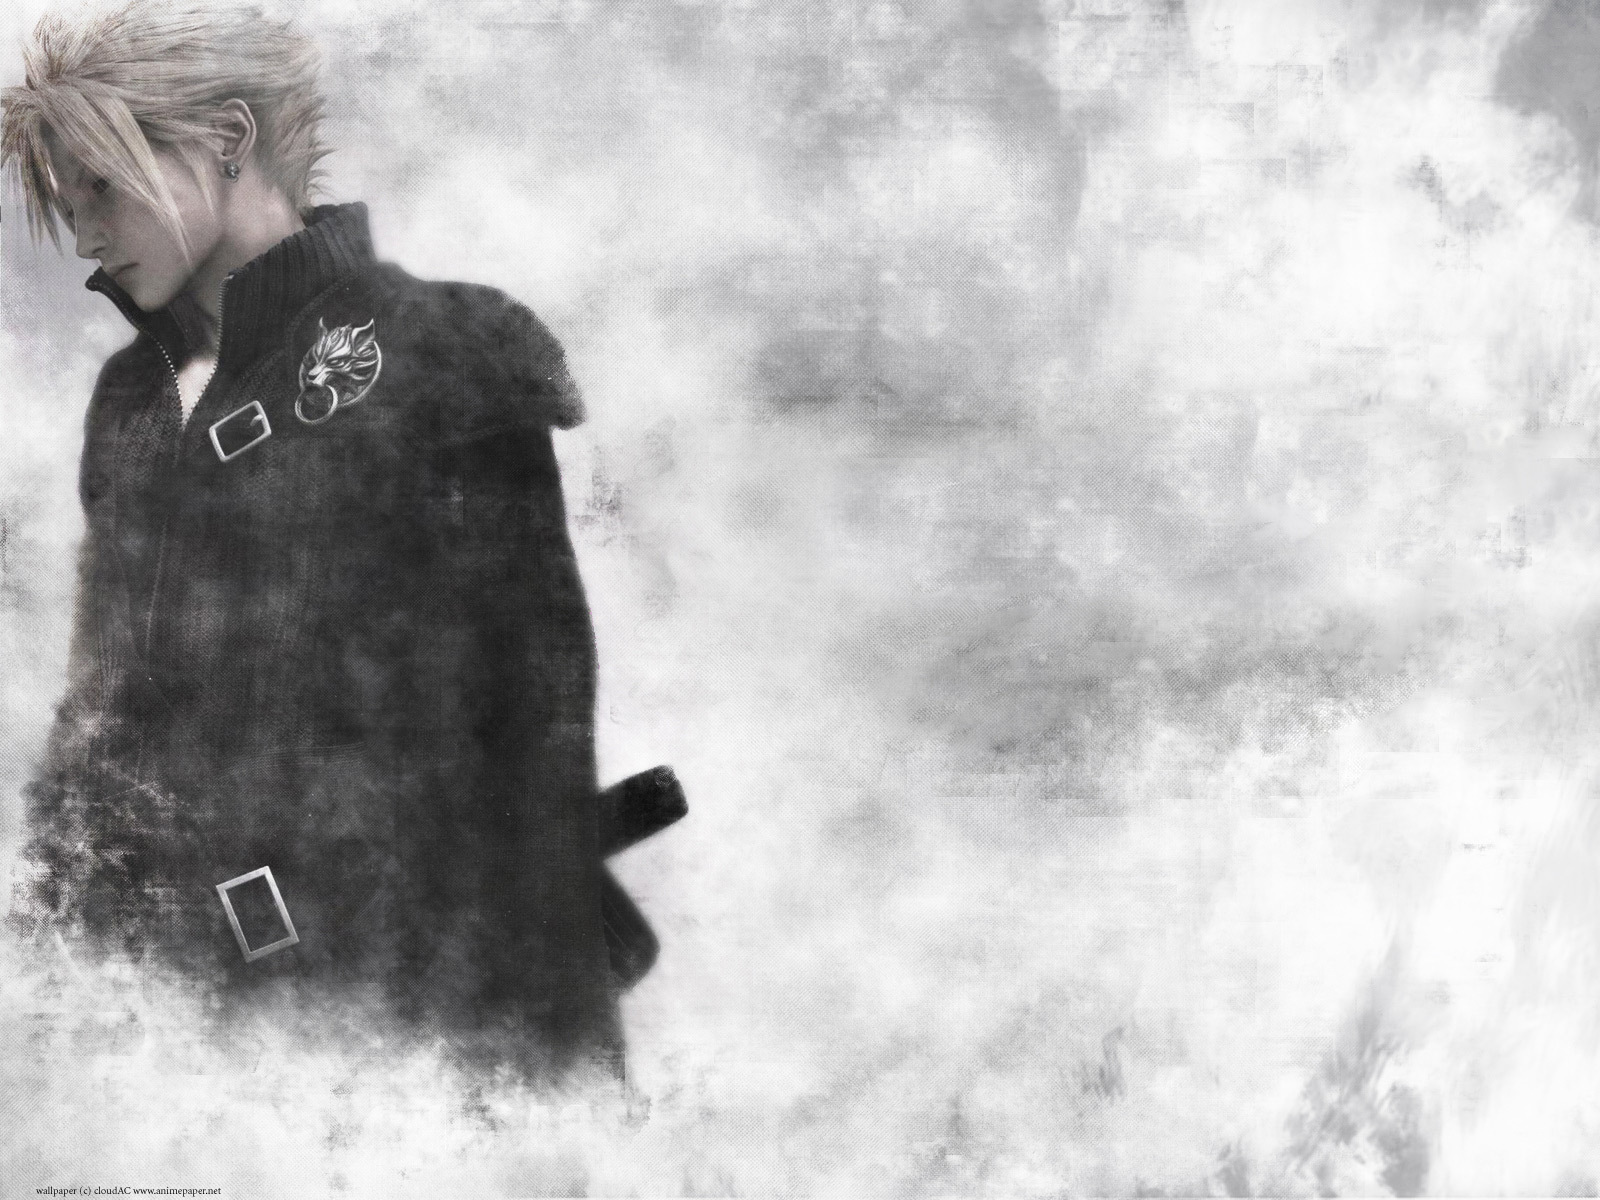 Cloud Strife images final fantasy 7 HD wallpaper and background photos